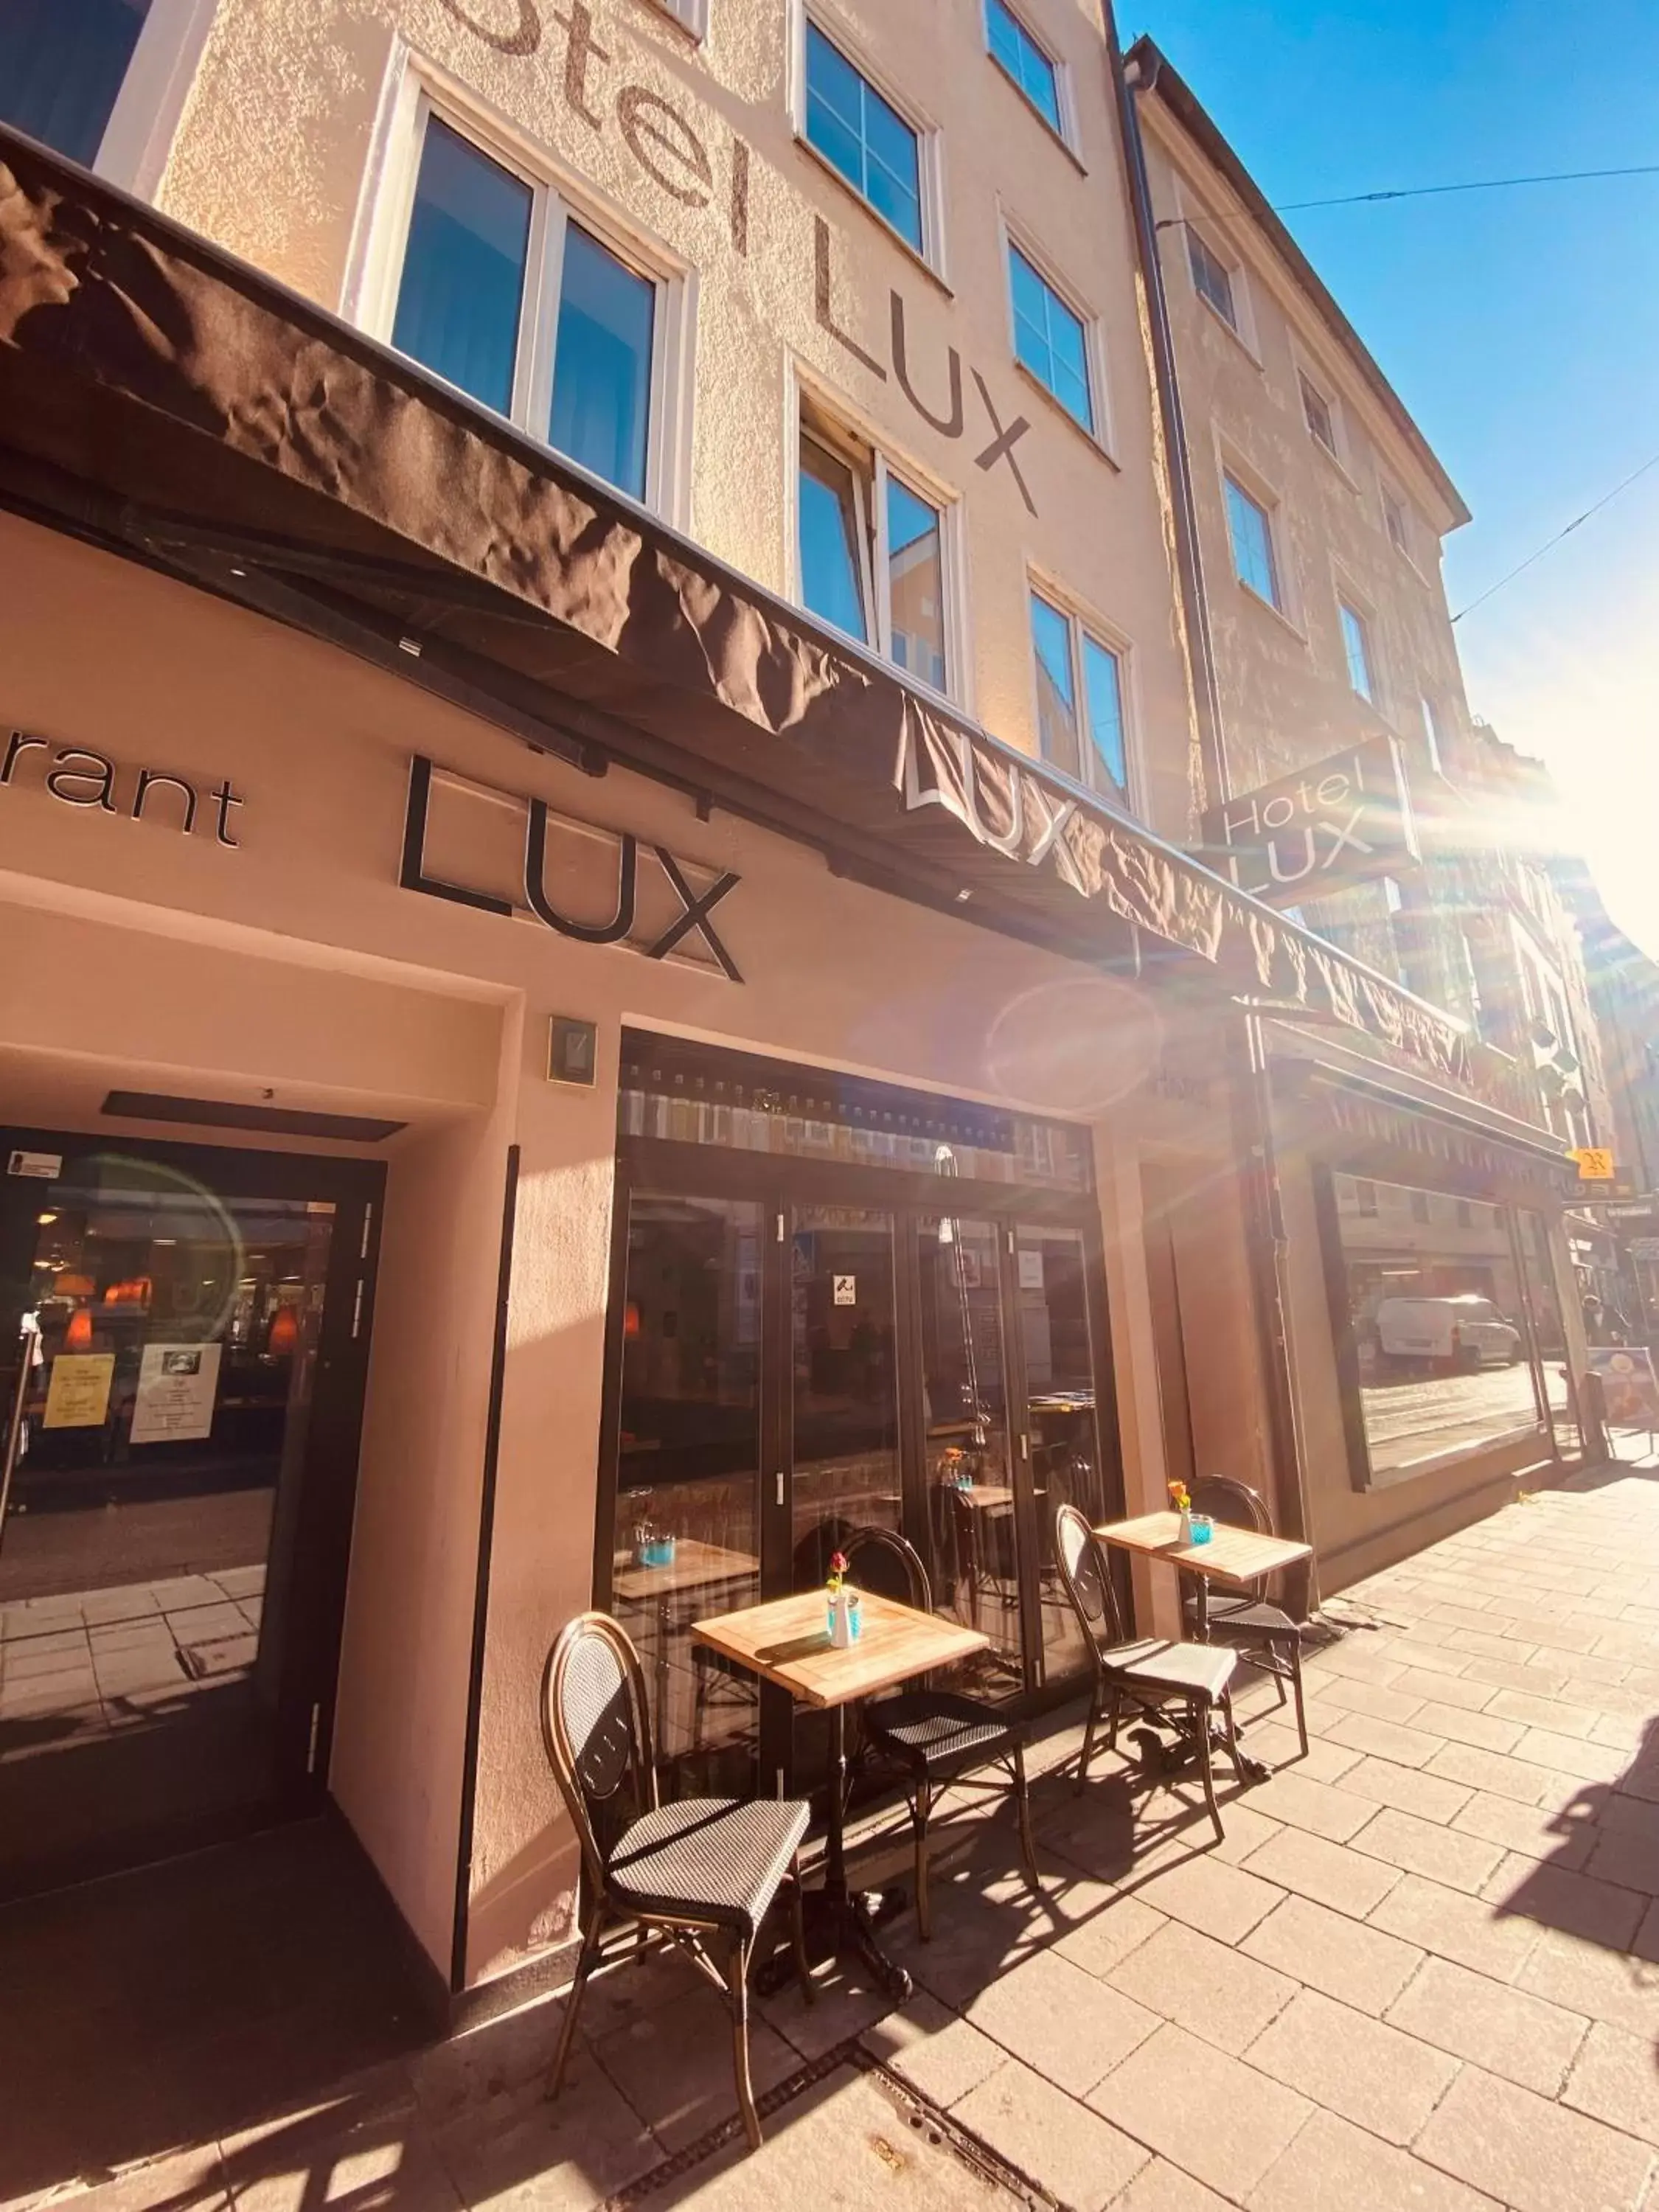 Property building in Hotel Lux